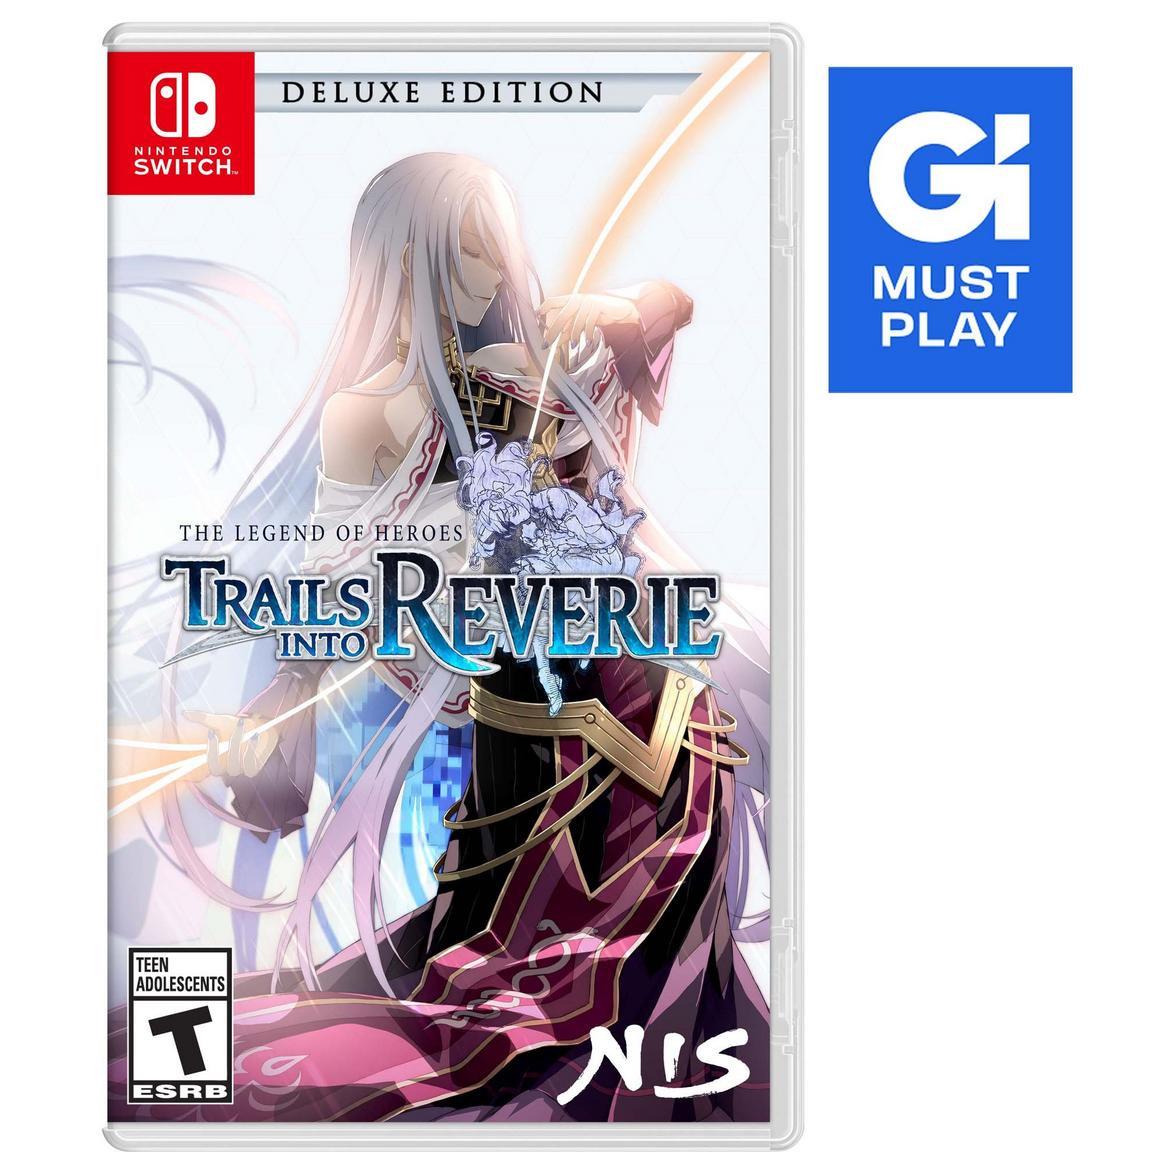 The Legend of Heroes Trails into Reverie Nintendo Switch for $29.99